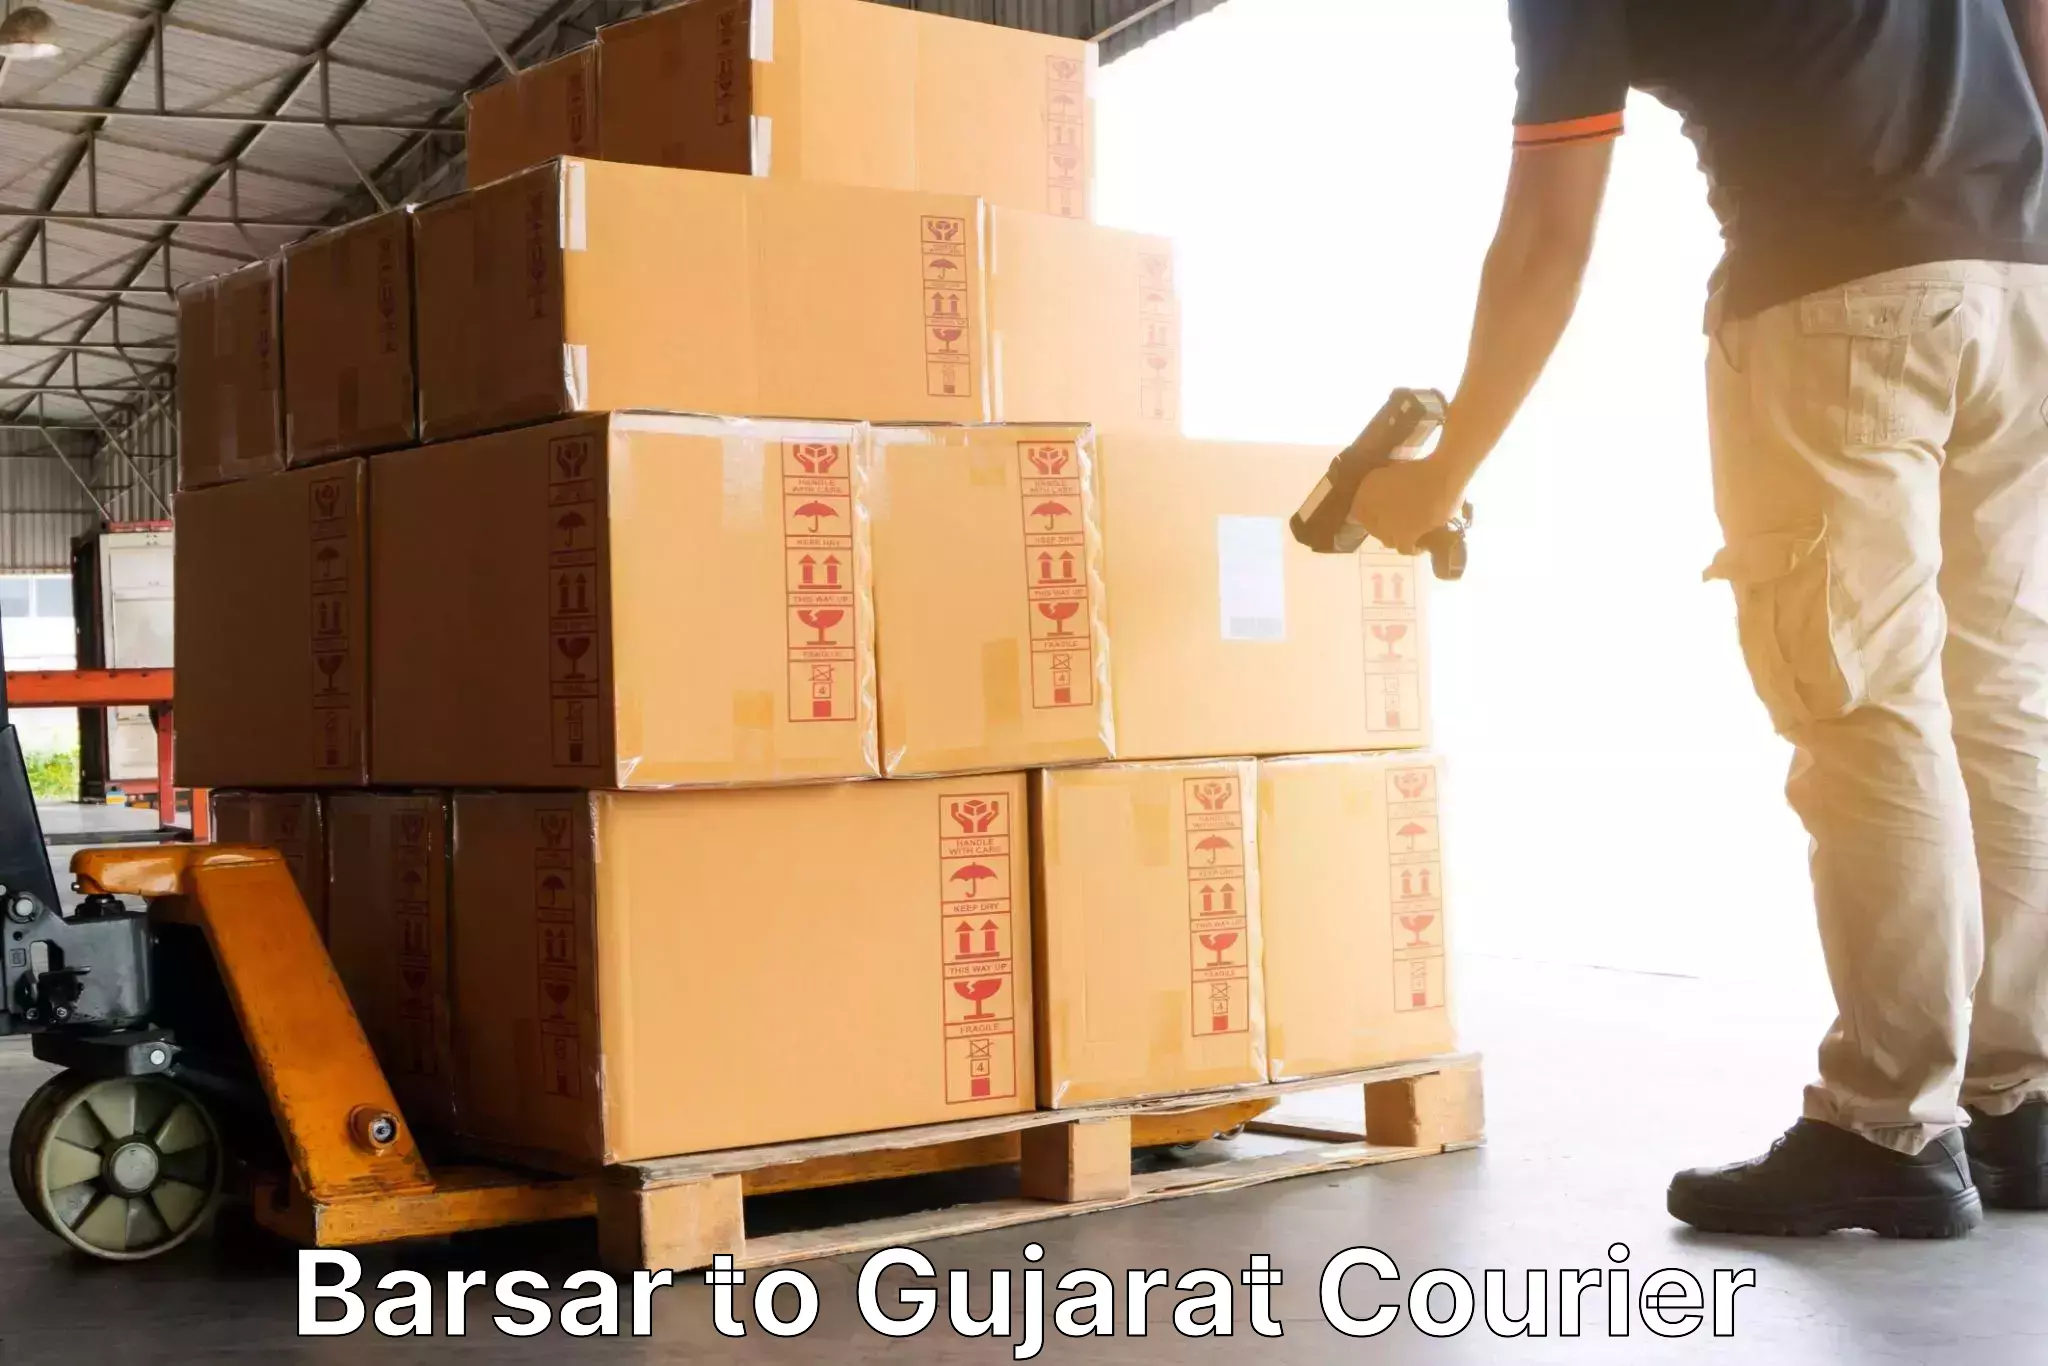 Flexible delivery schedules in Barsar to Kachchh